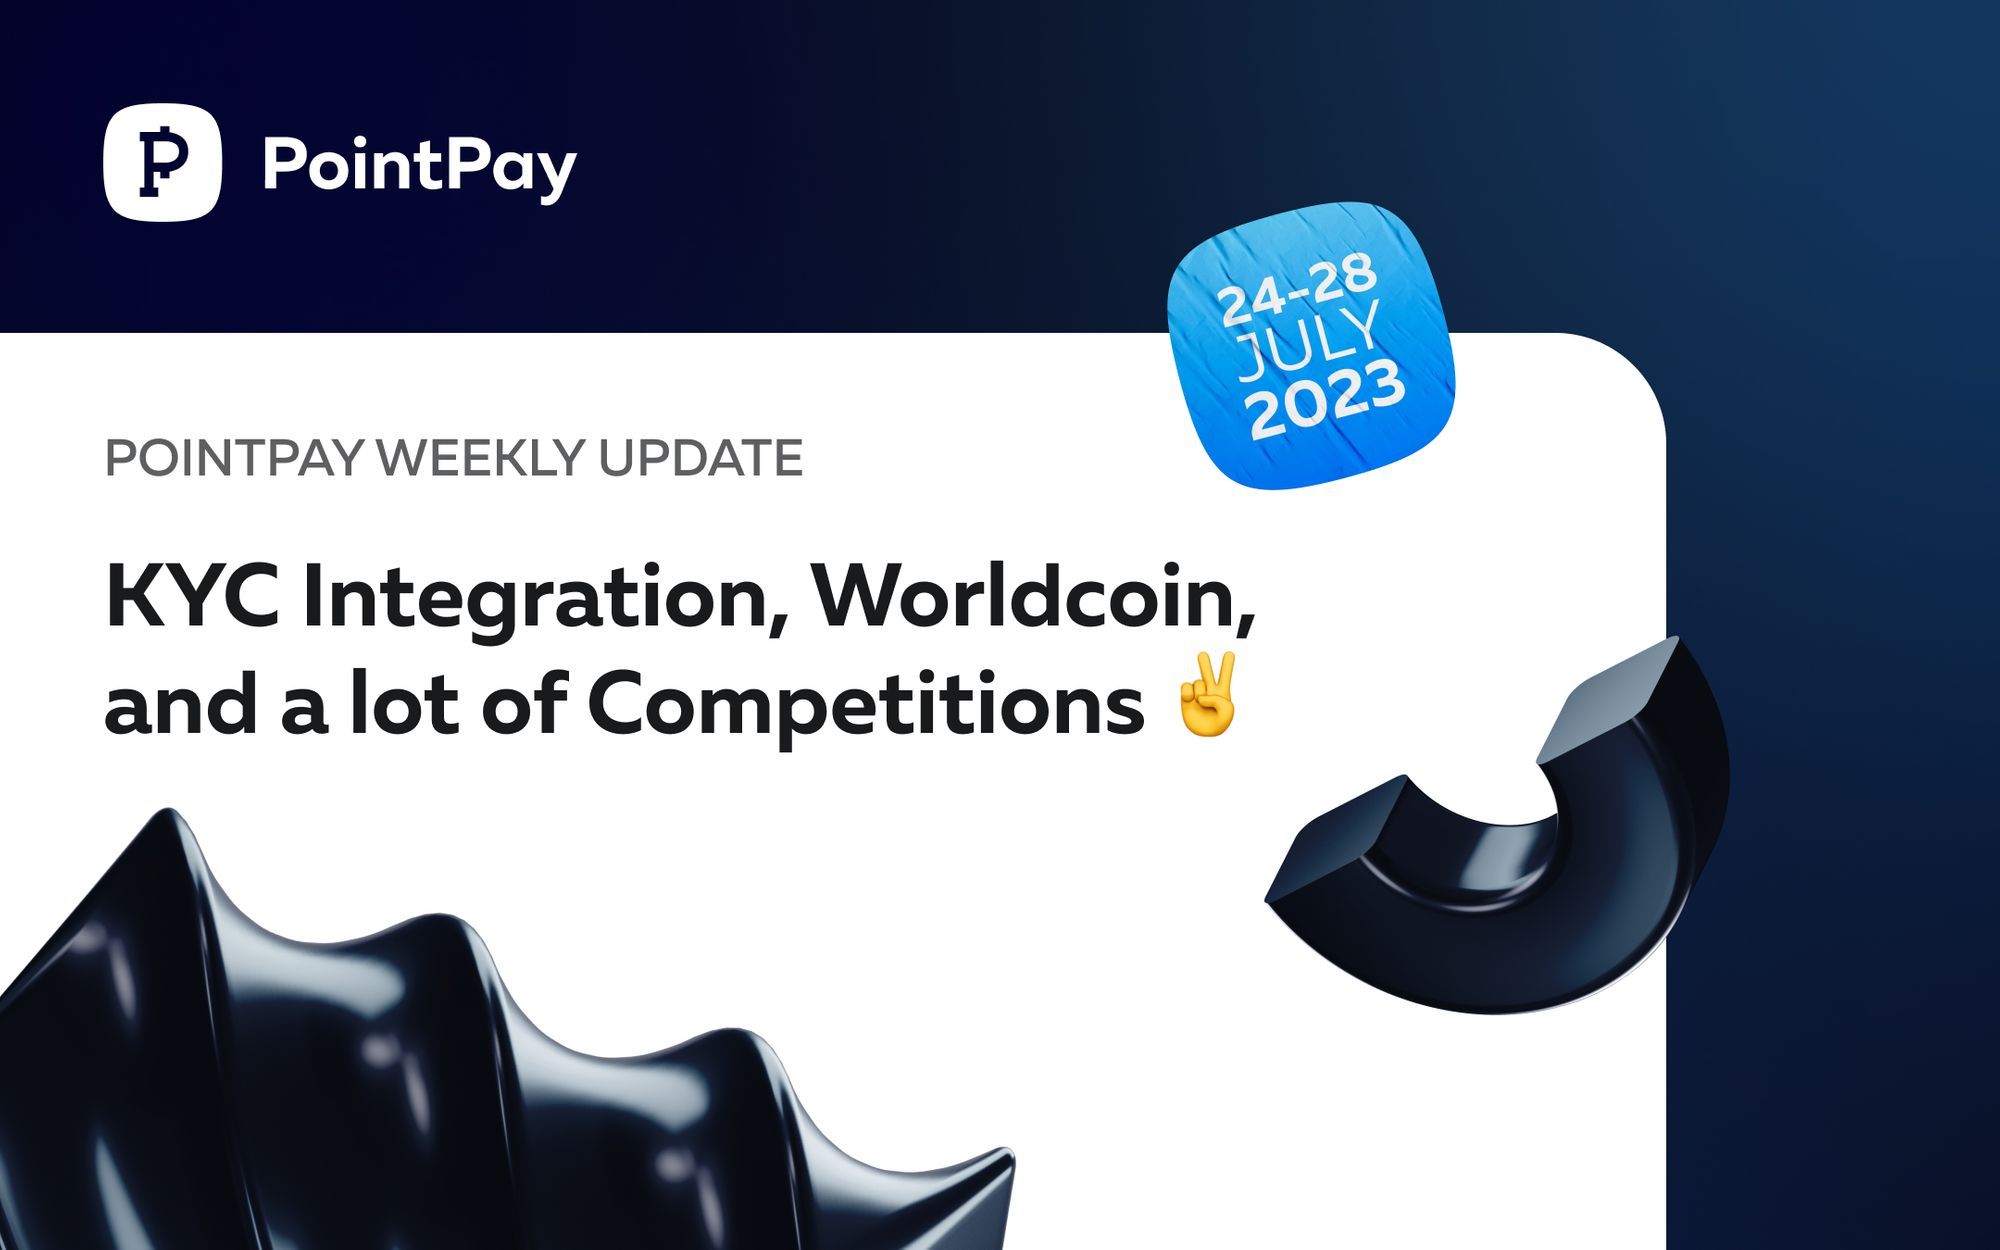 PointPay Weekly Update (24-28 July 2023)